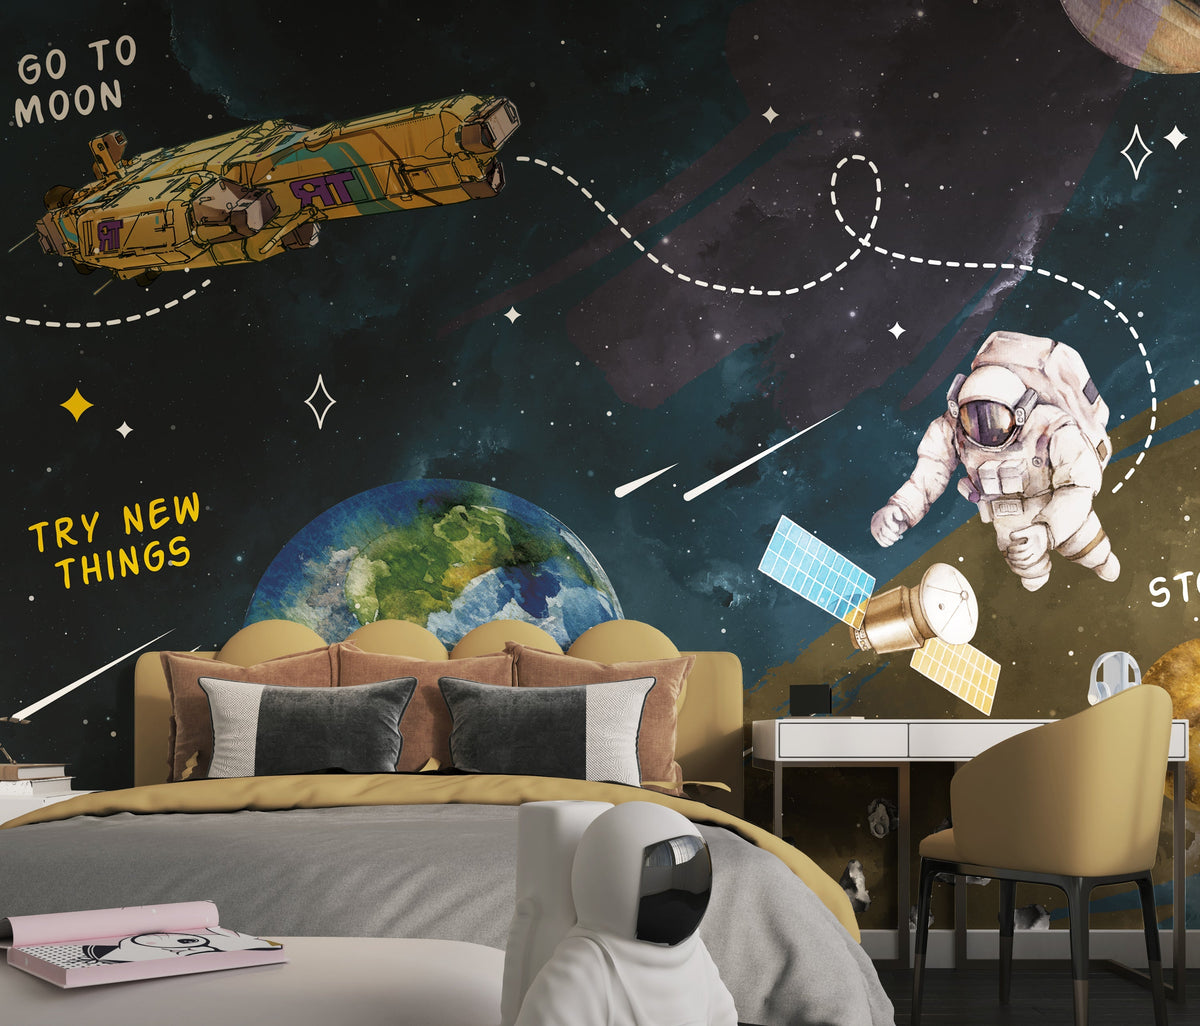 Kids Room Wallpaper Mural for the Ultimate Go to Moon Theme-ChandeliersDecor